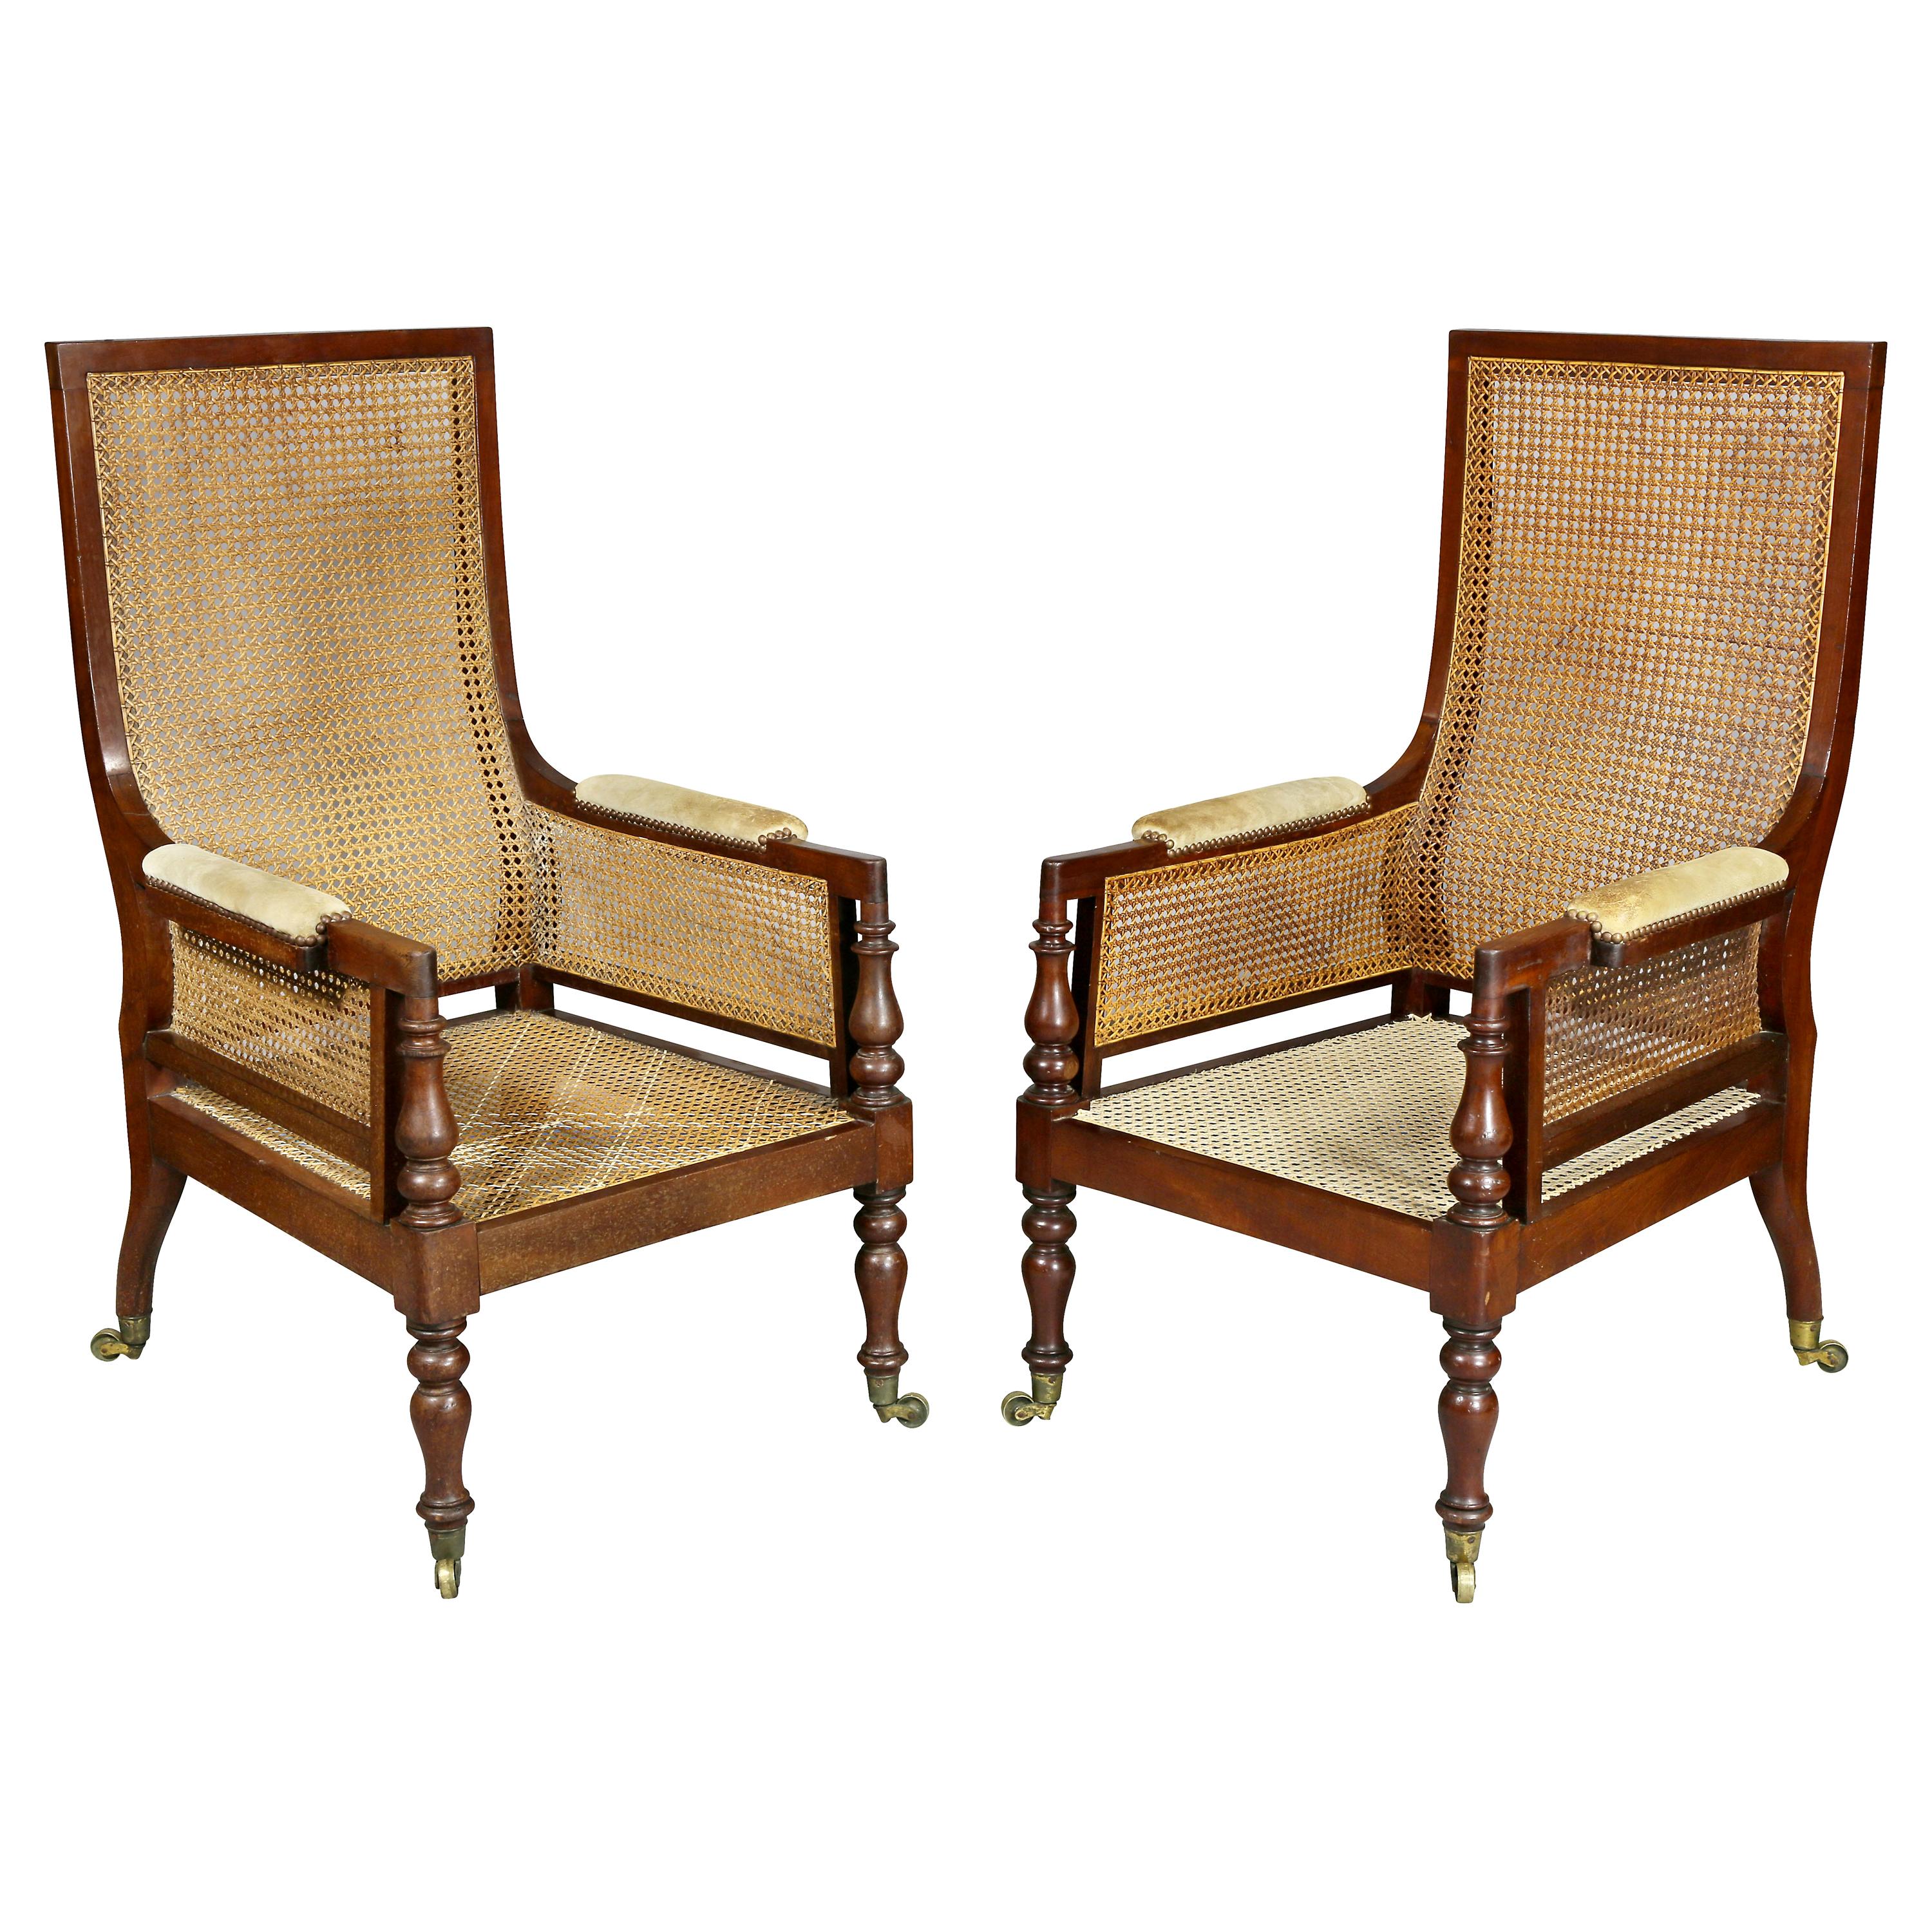 Pair of Late Regency Mahogany and Caned Armchairs